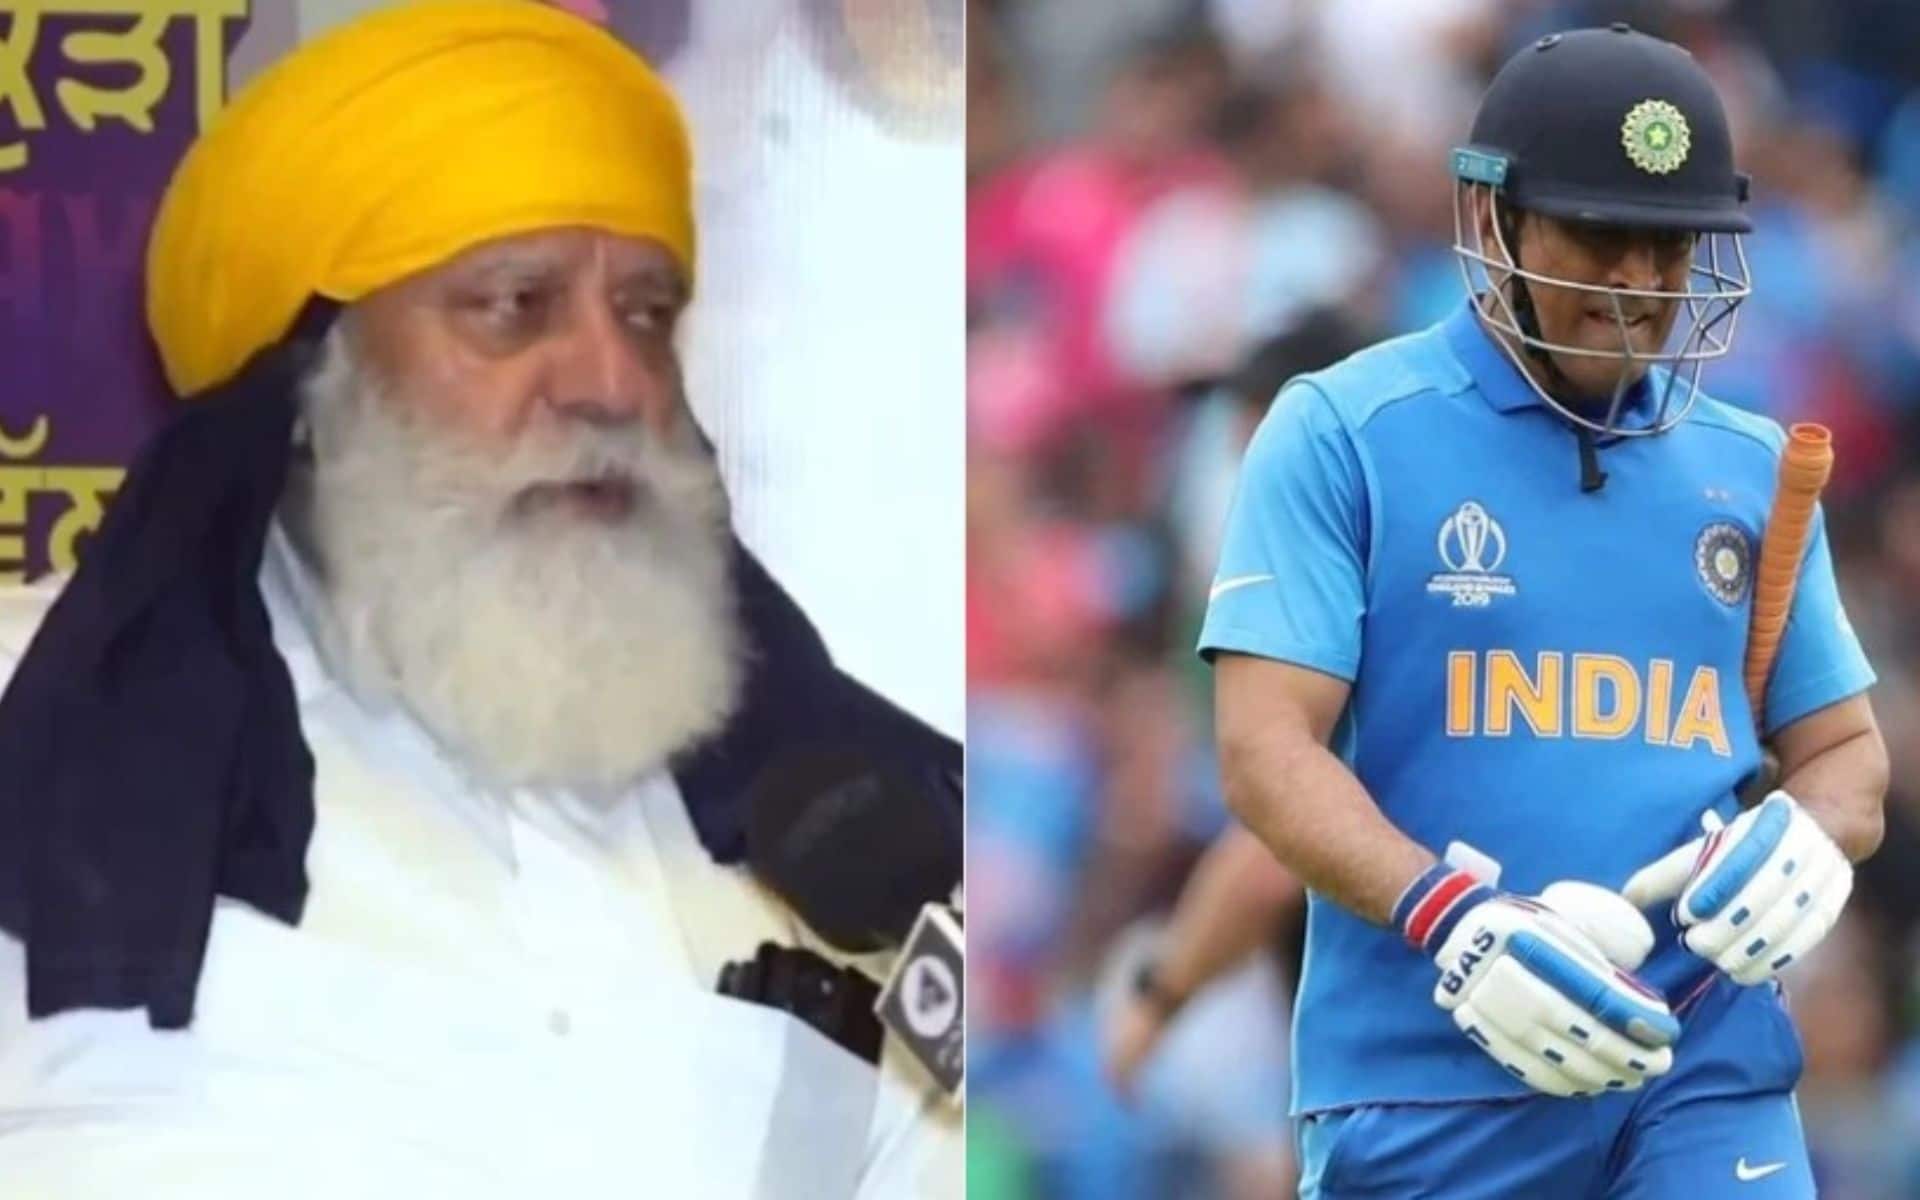 Yuvraj Singh's father, Yograj has launched a new attack on MS Dhoni (Twitter)